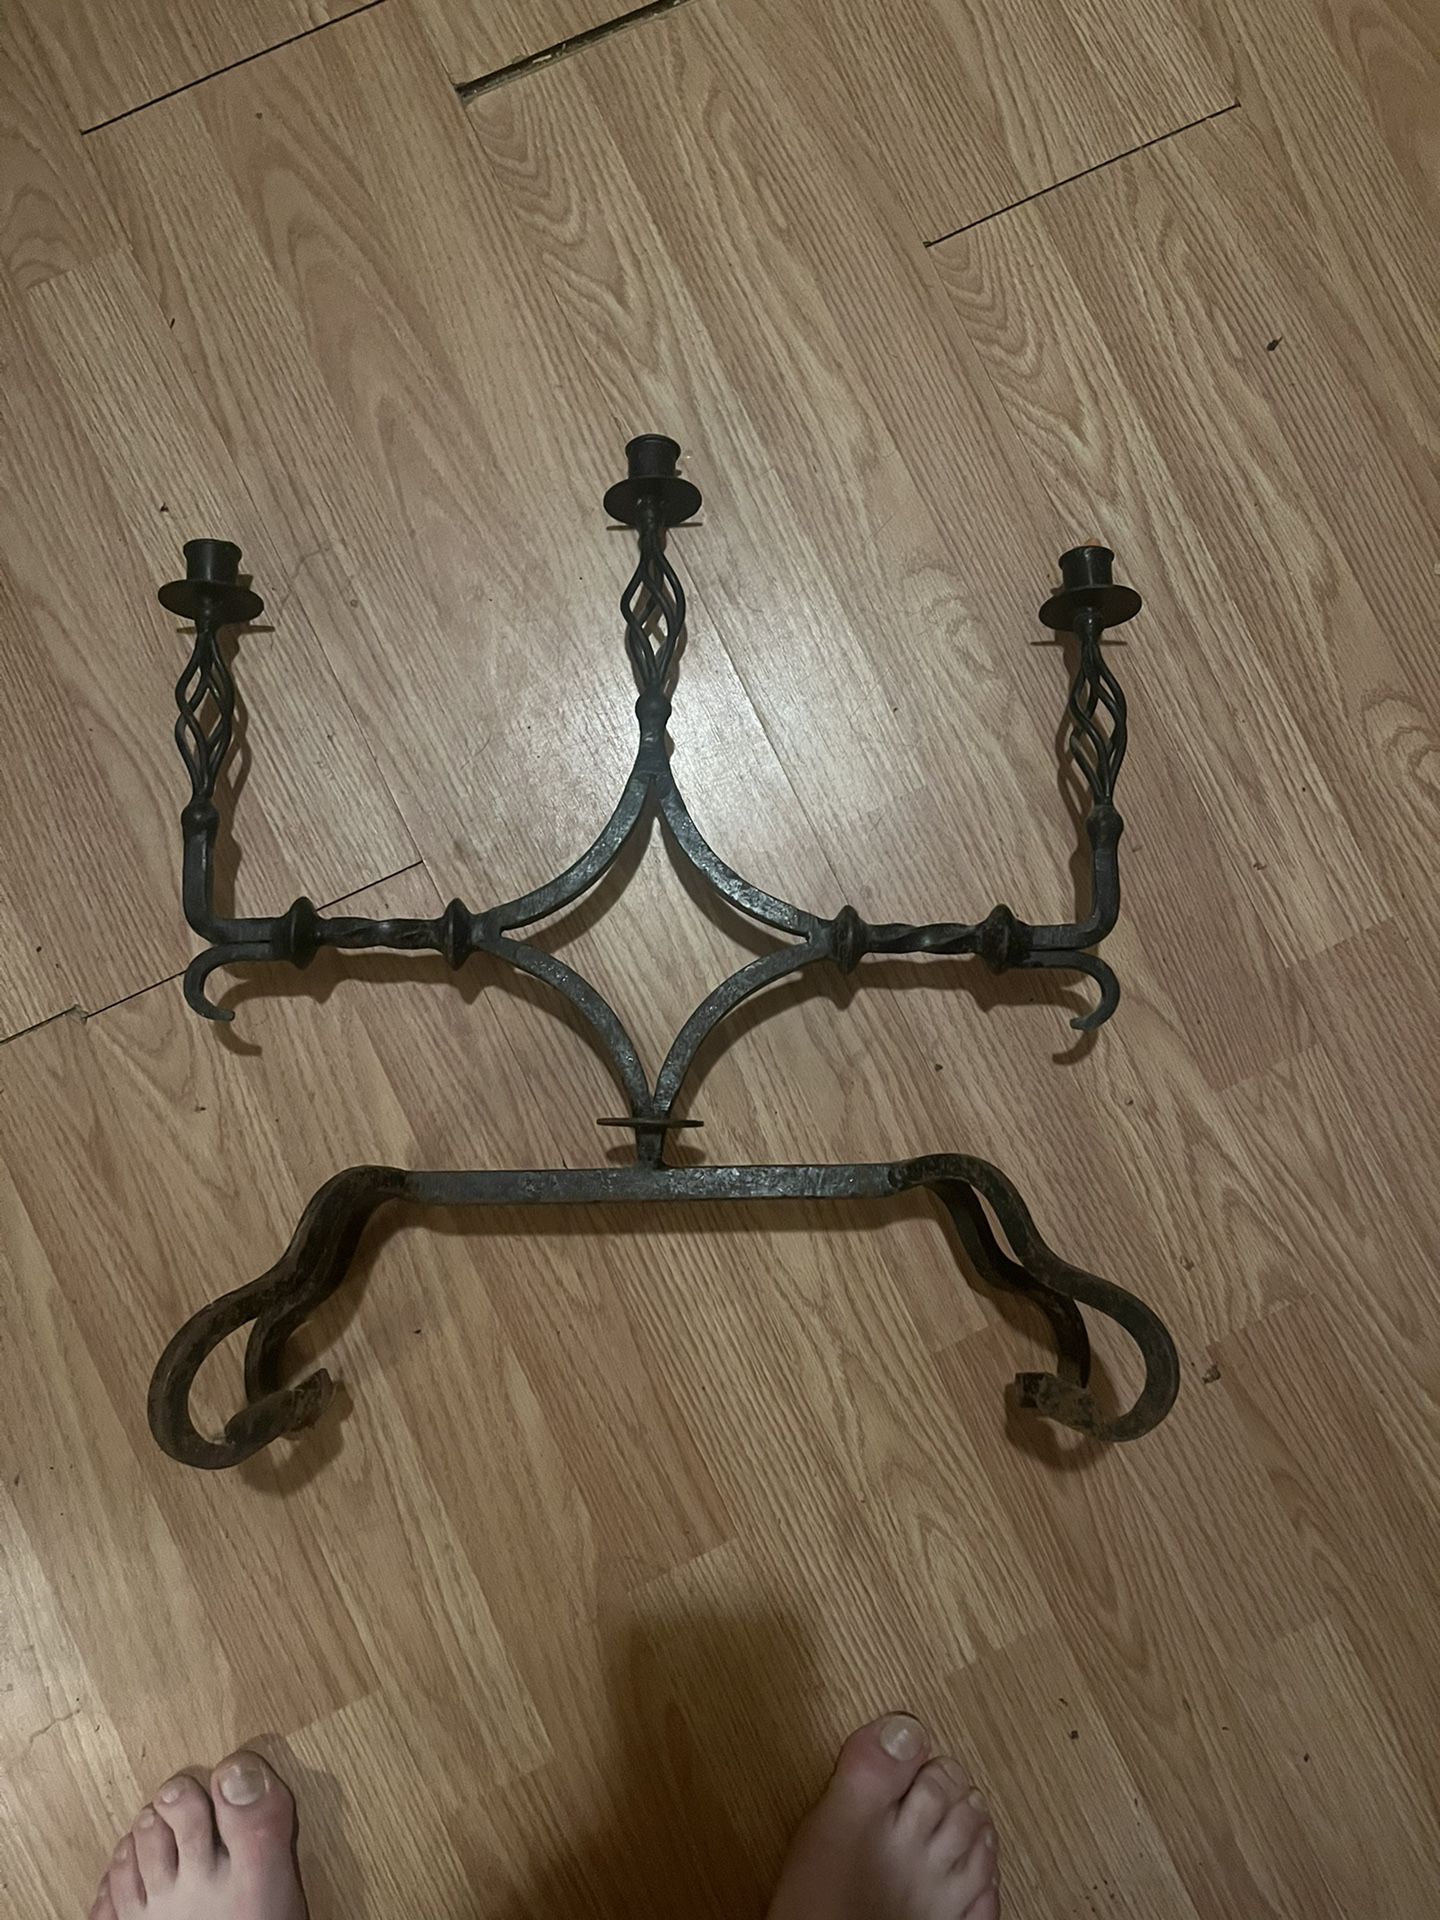 Antique wrought iron candelabra and basket